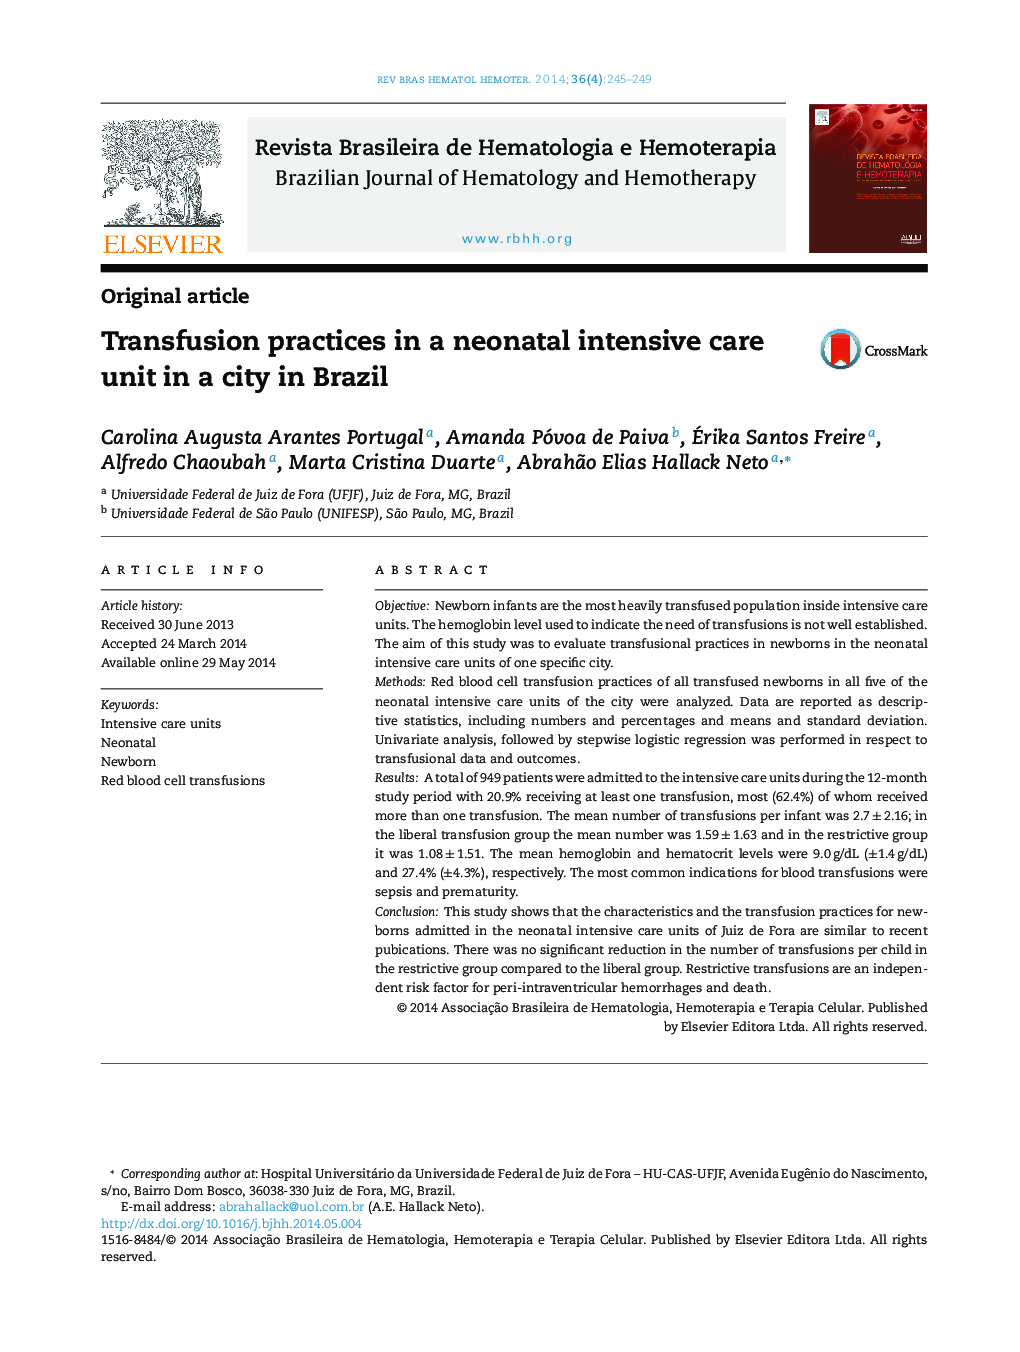 Transfusion practices in a neonatal intensive care unit in a city in Brazil